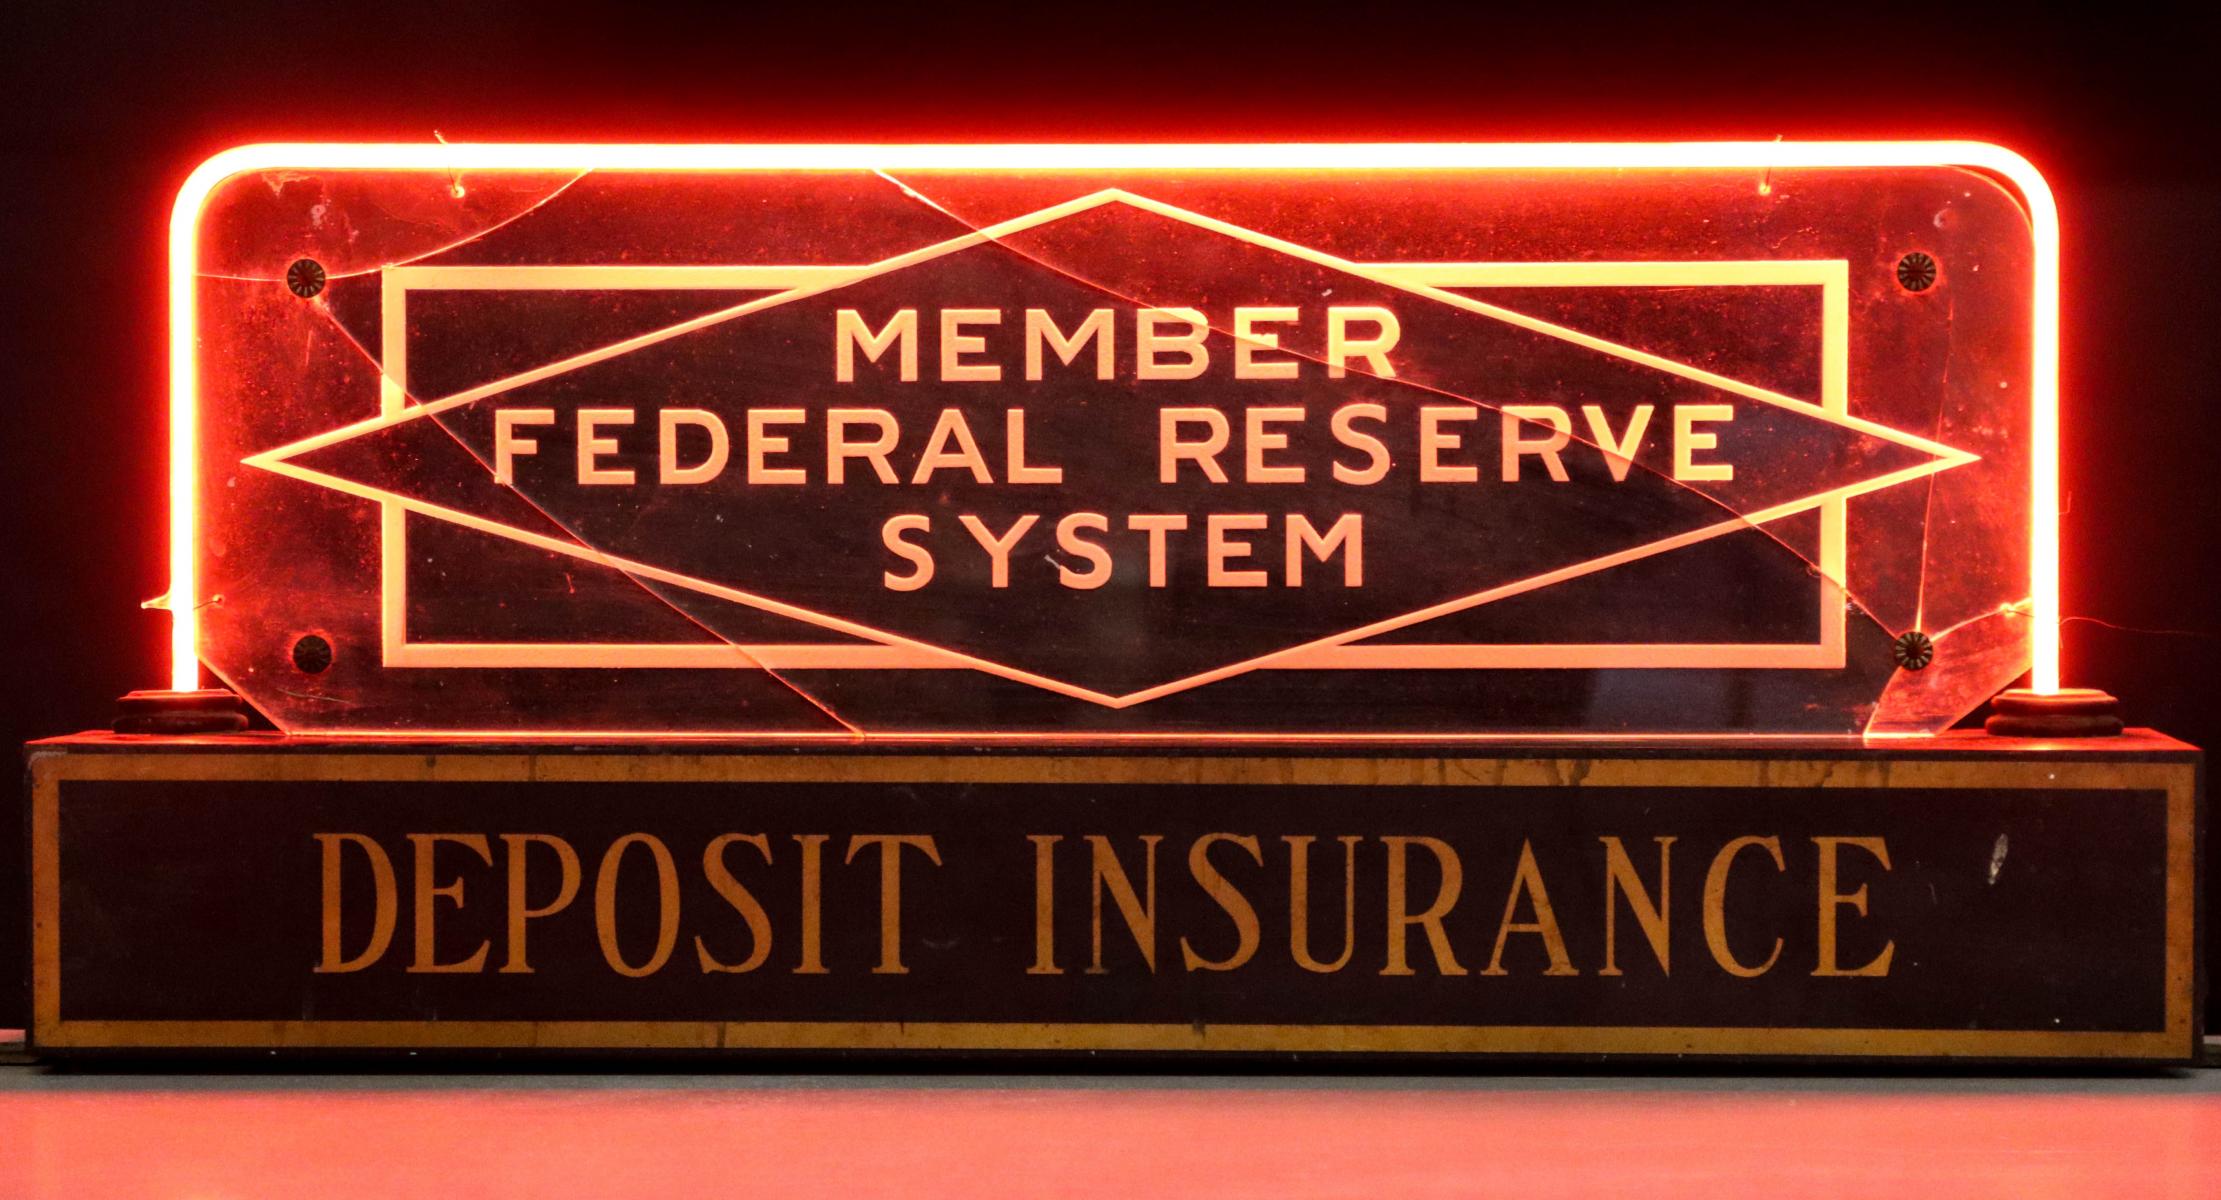 A FEDERAL RESERVE DEPOSIT INSURANCE SIGNED WITH RED NEON